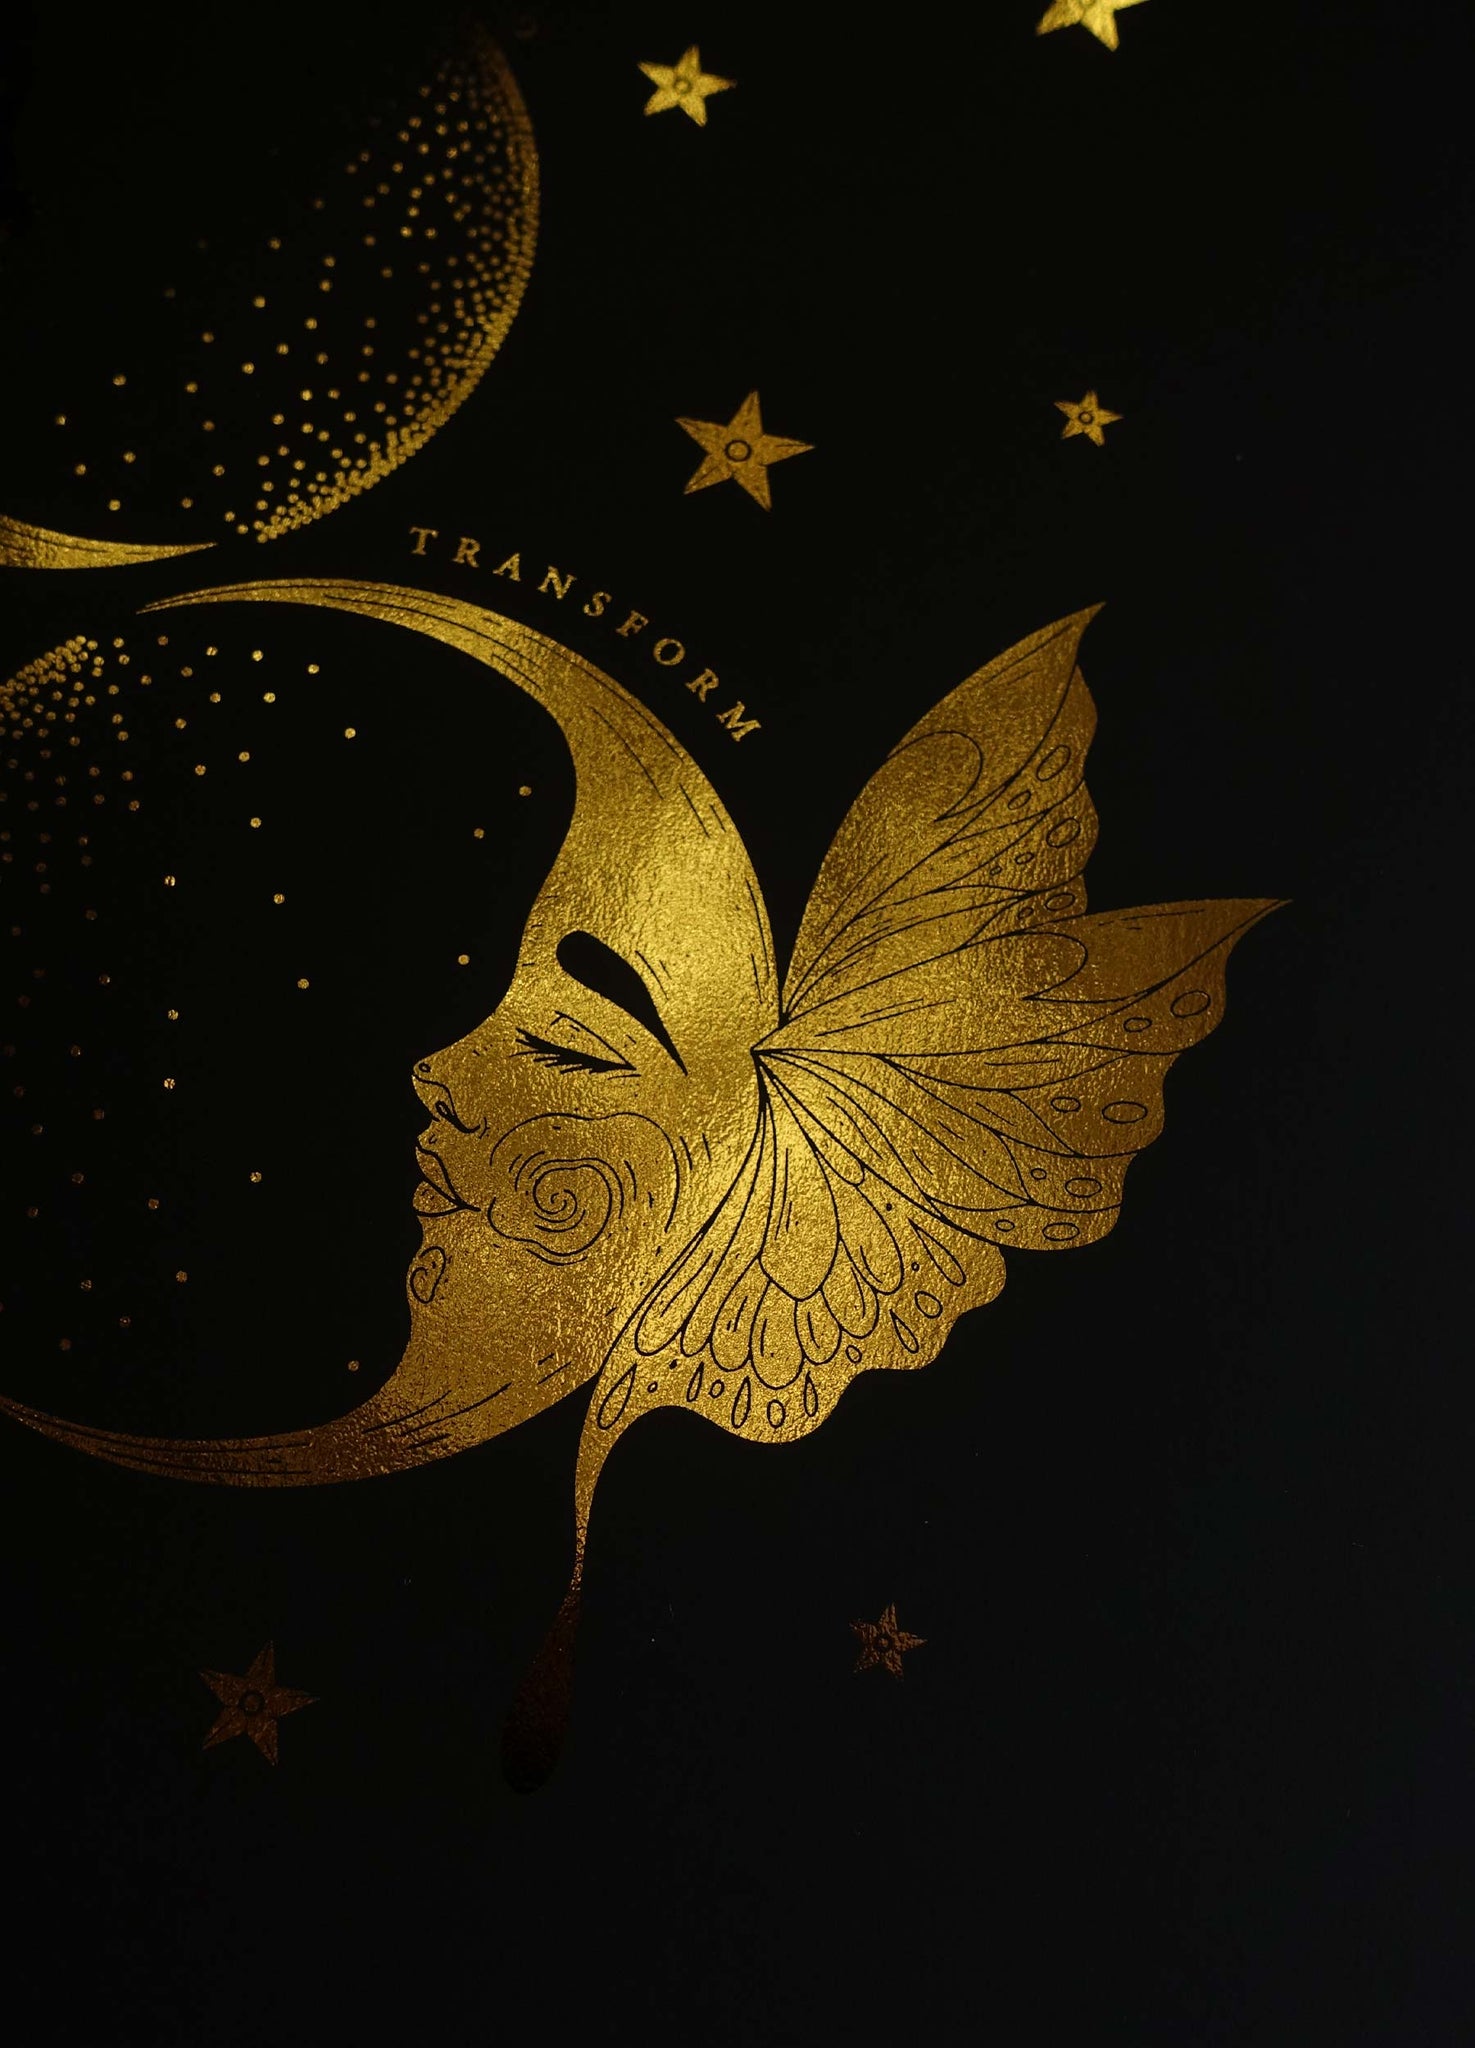 Bloom and transform Crescent Moons with flowers and butterflies gold foil on black paper art print by Cocorrina & Co